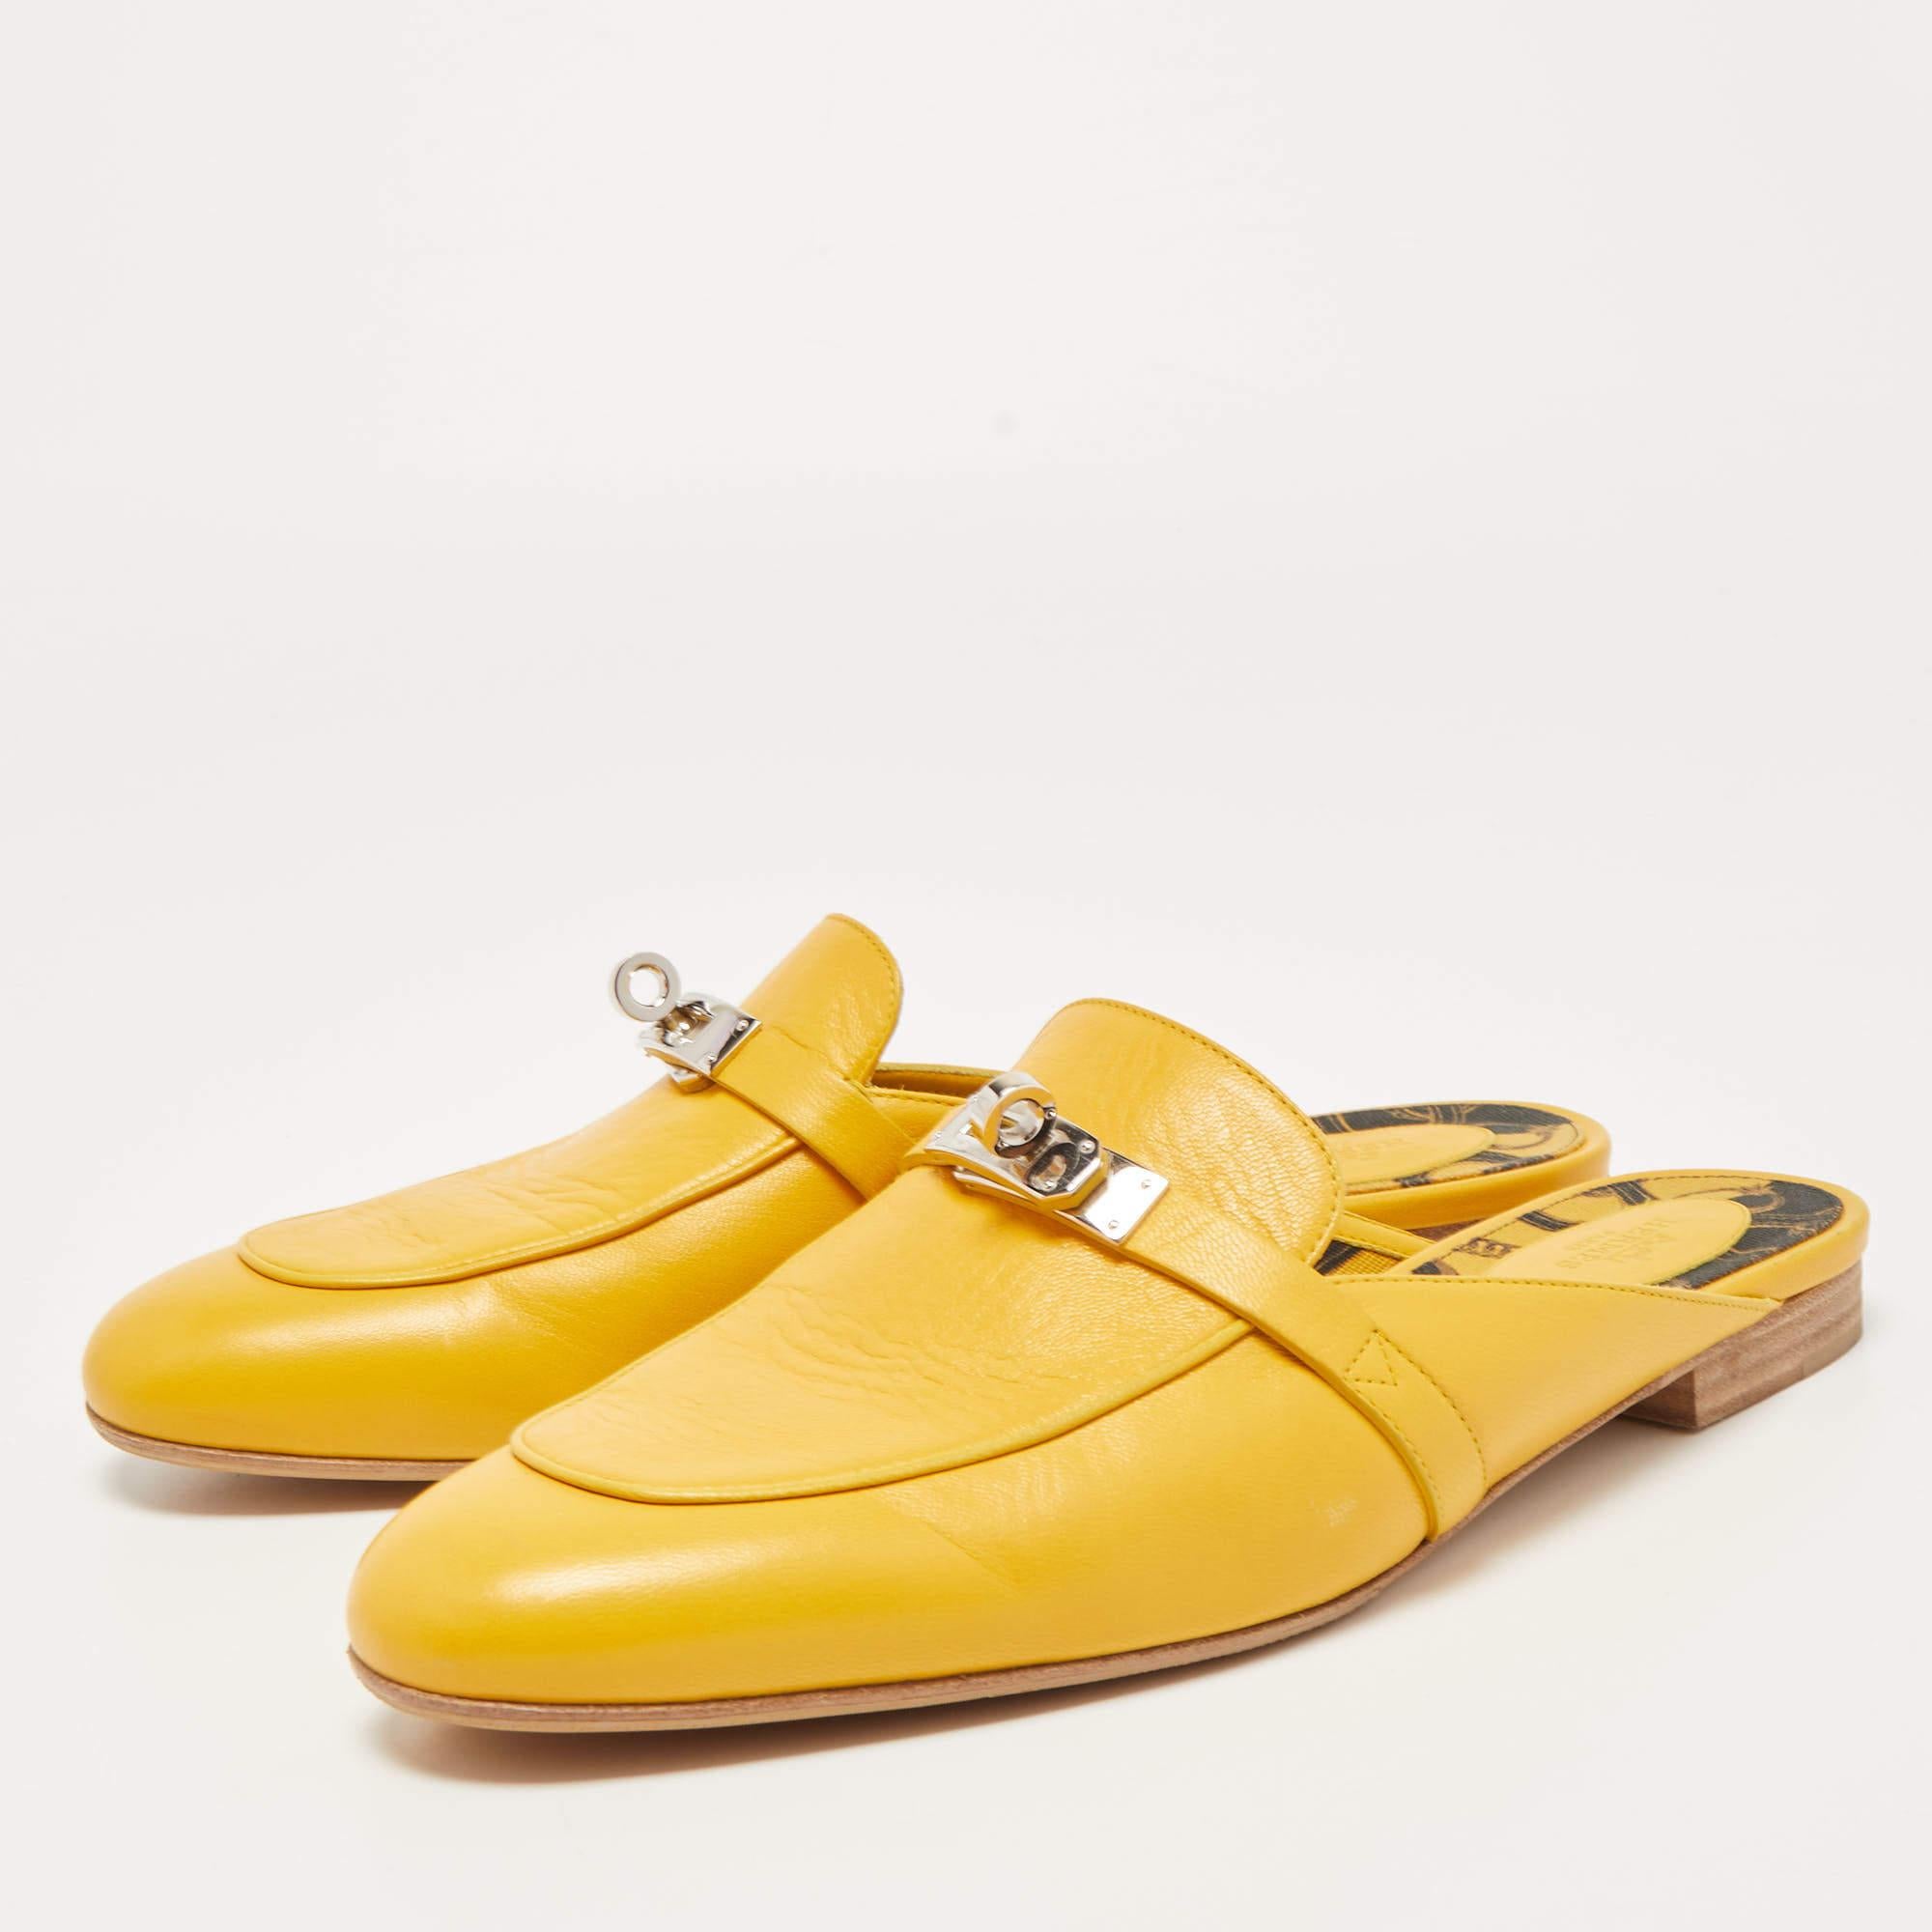 Women's Hermes Yellow Leather Oz Flat Mules Size 41